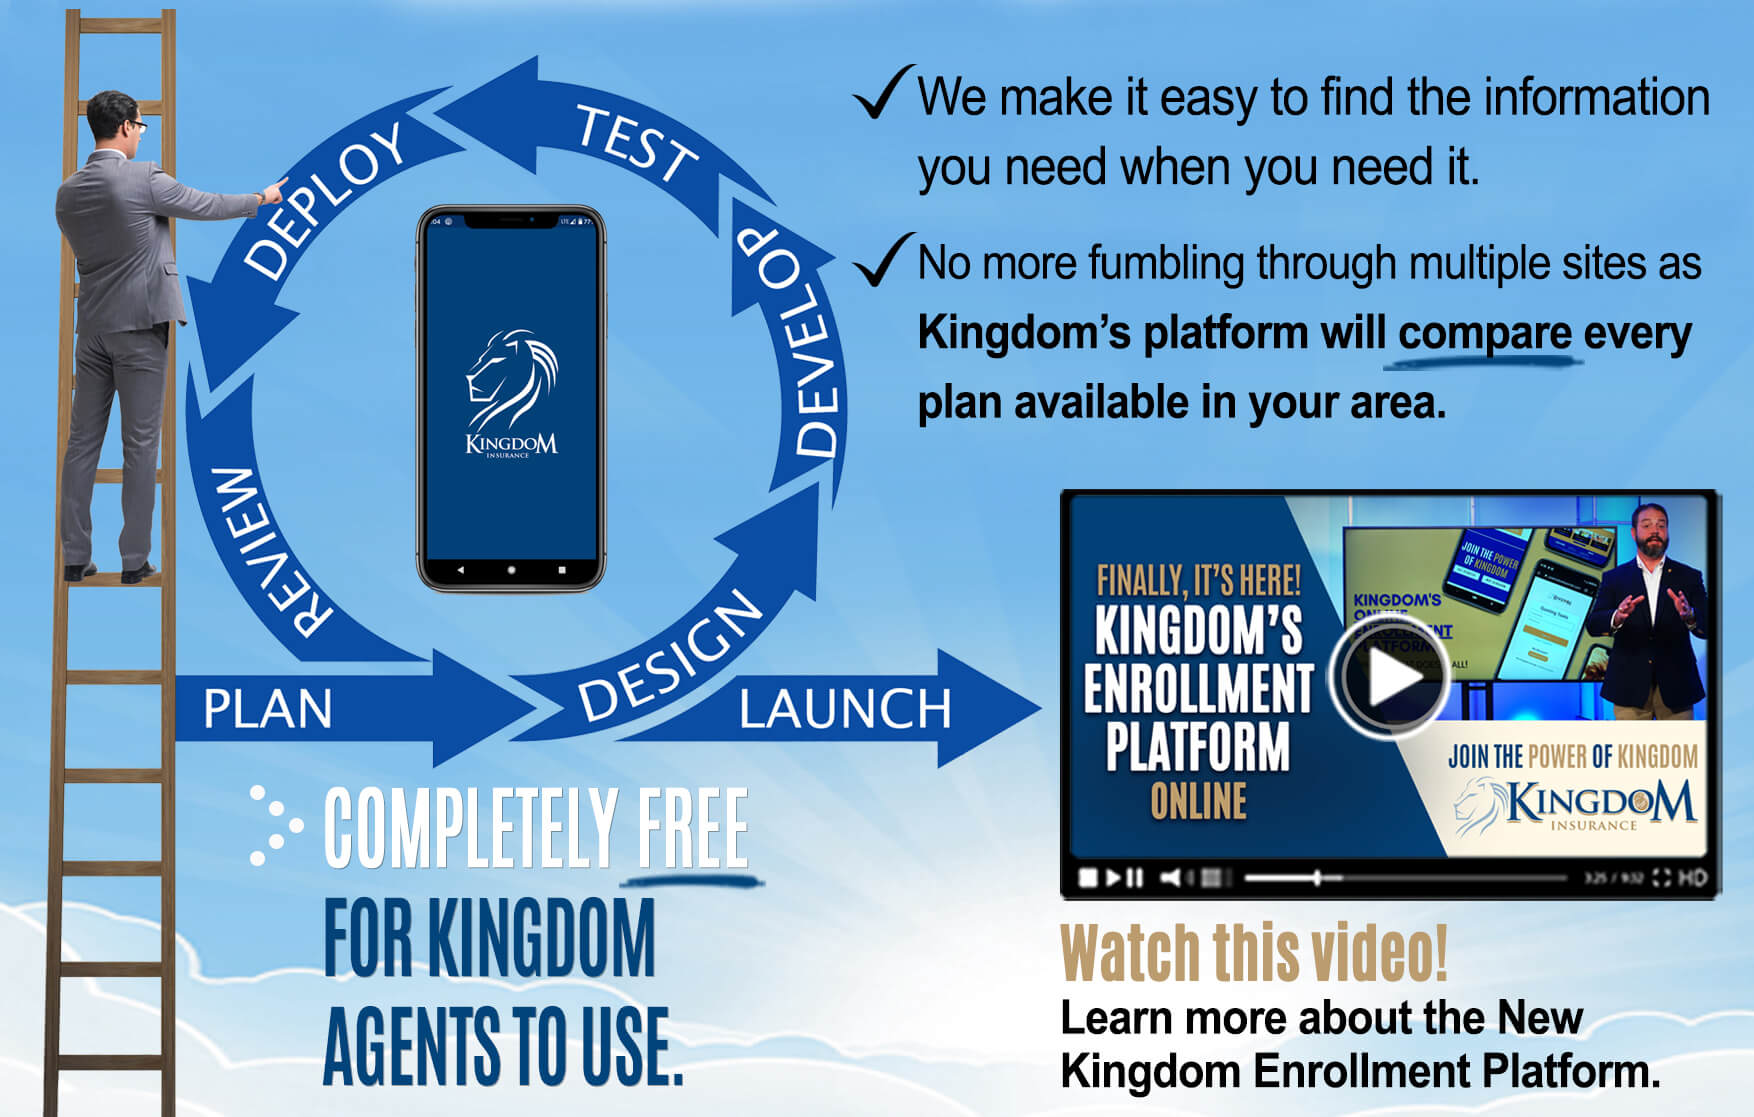 Learn more about becoming a Kingdom Agent!